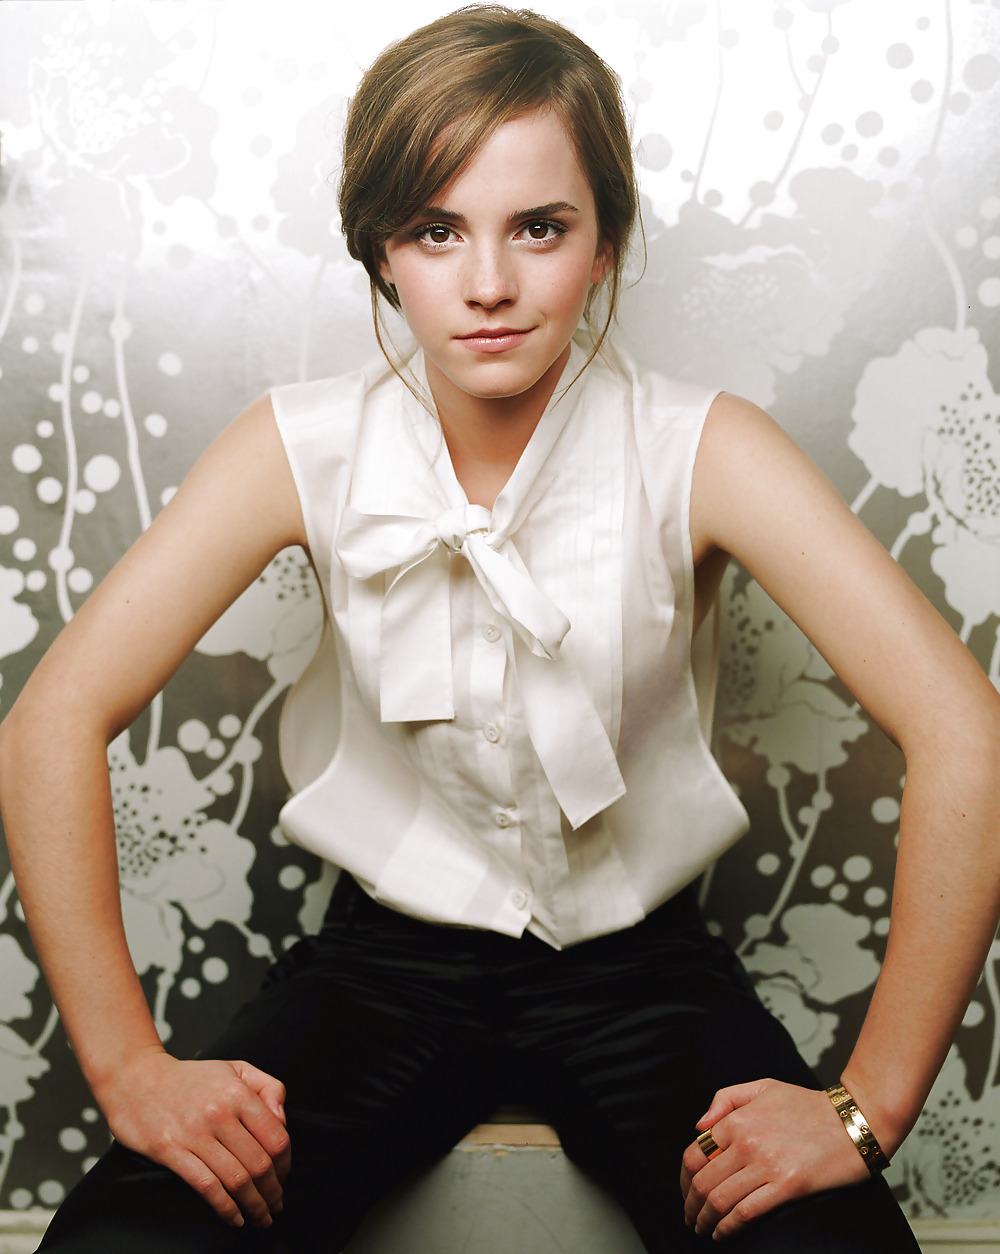 Emma Watson Sexy Pics Over The Years #22049493